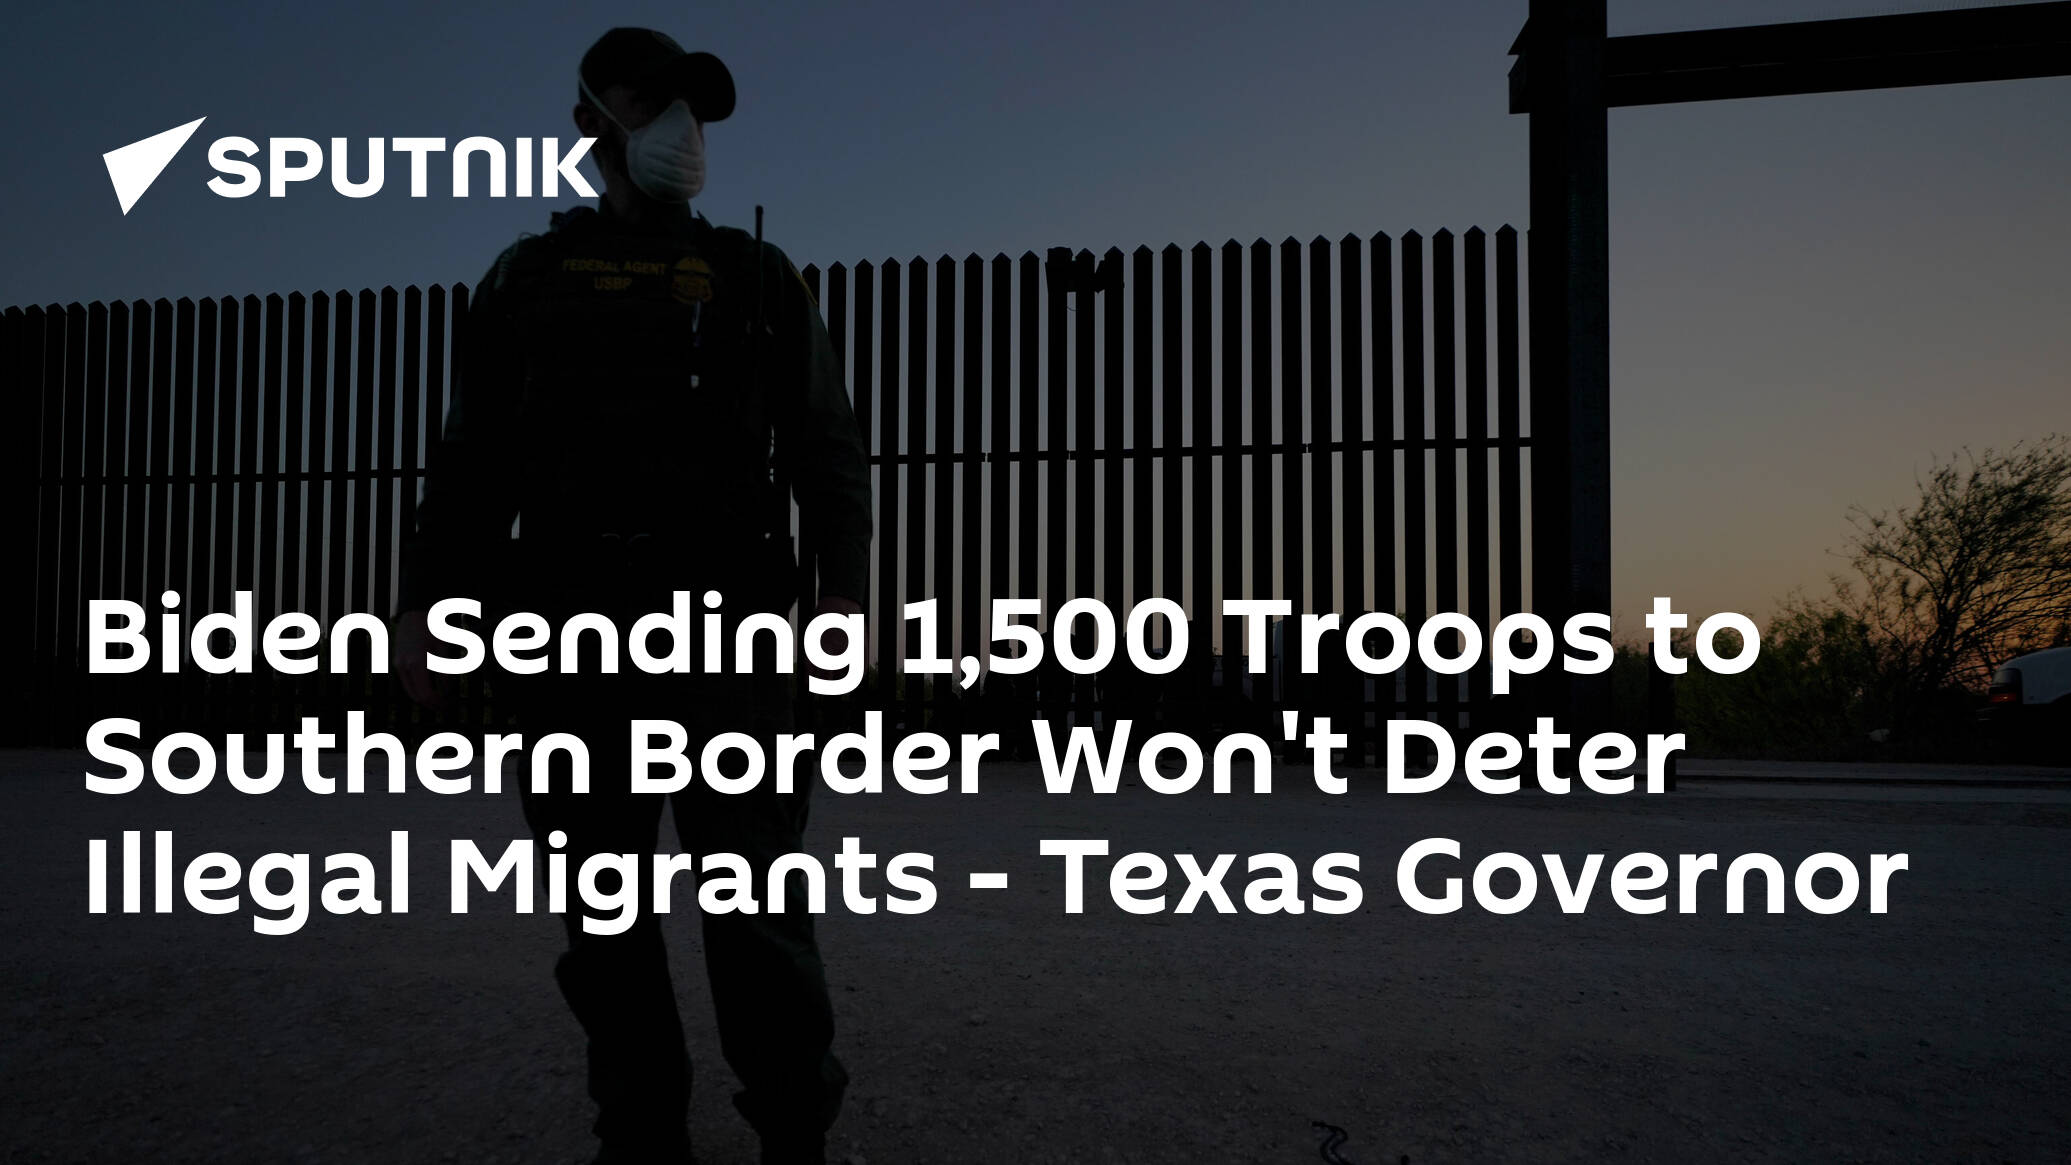 Biden Sending 1,500 Troops to Southern Border Won't Deter Illegal Migrants – Texas Governor